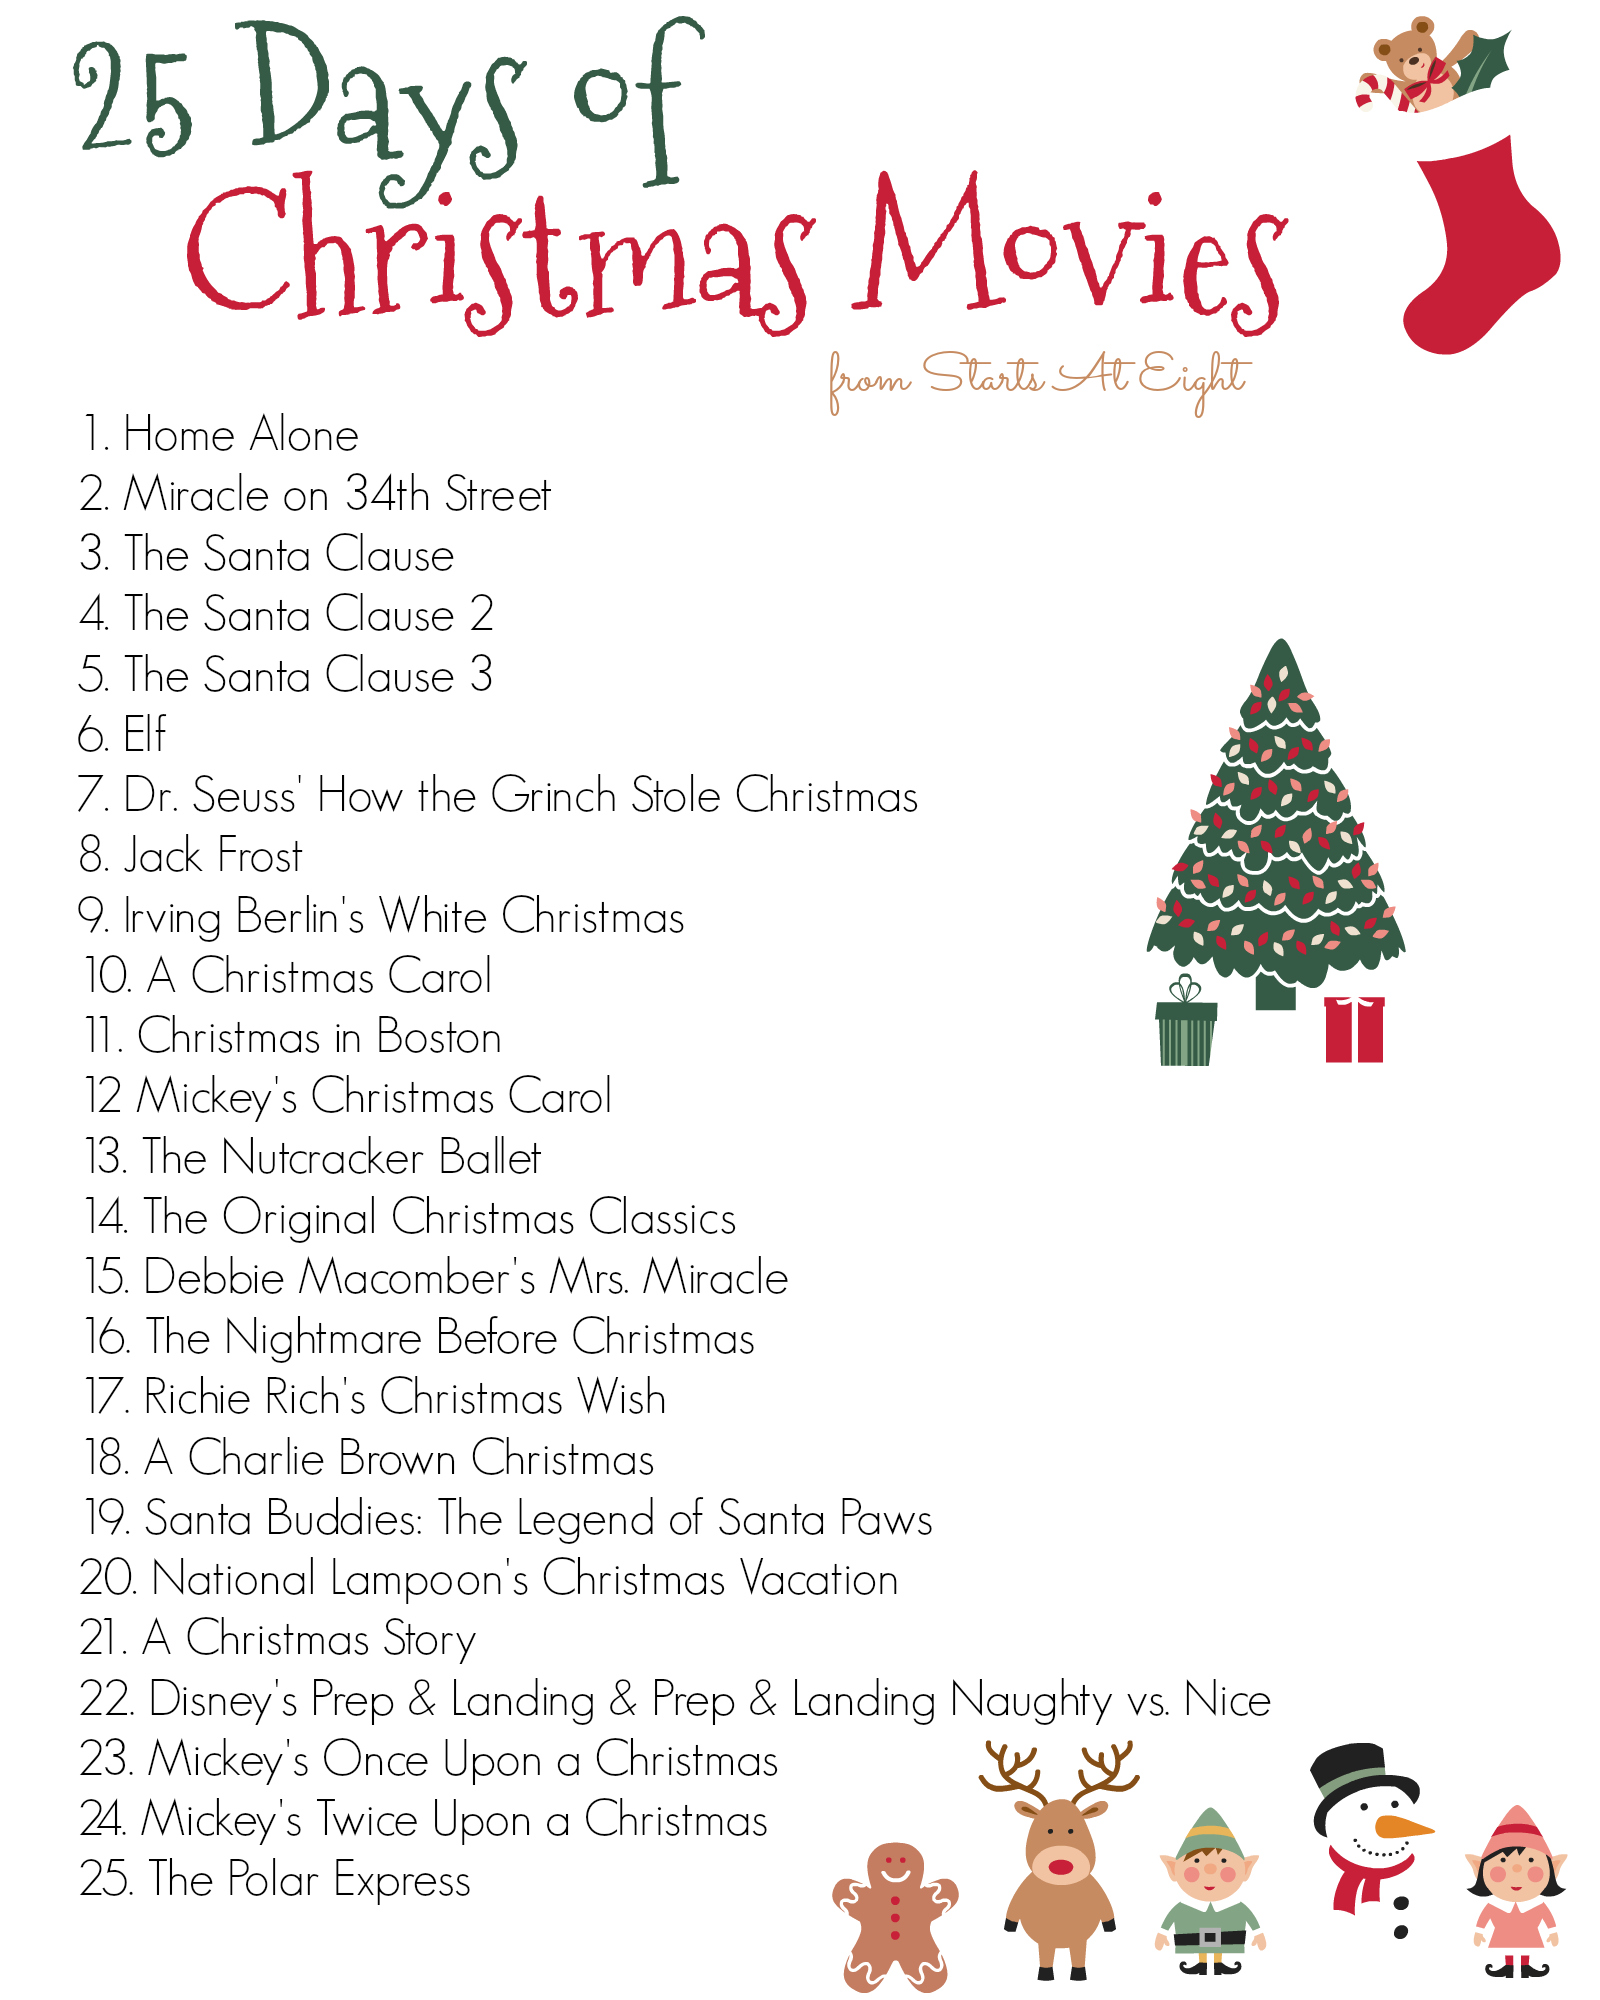 25 Days of Christmas Movies with Free Printable List StartsAtEight